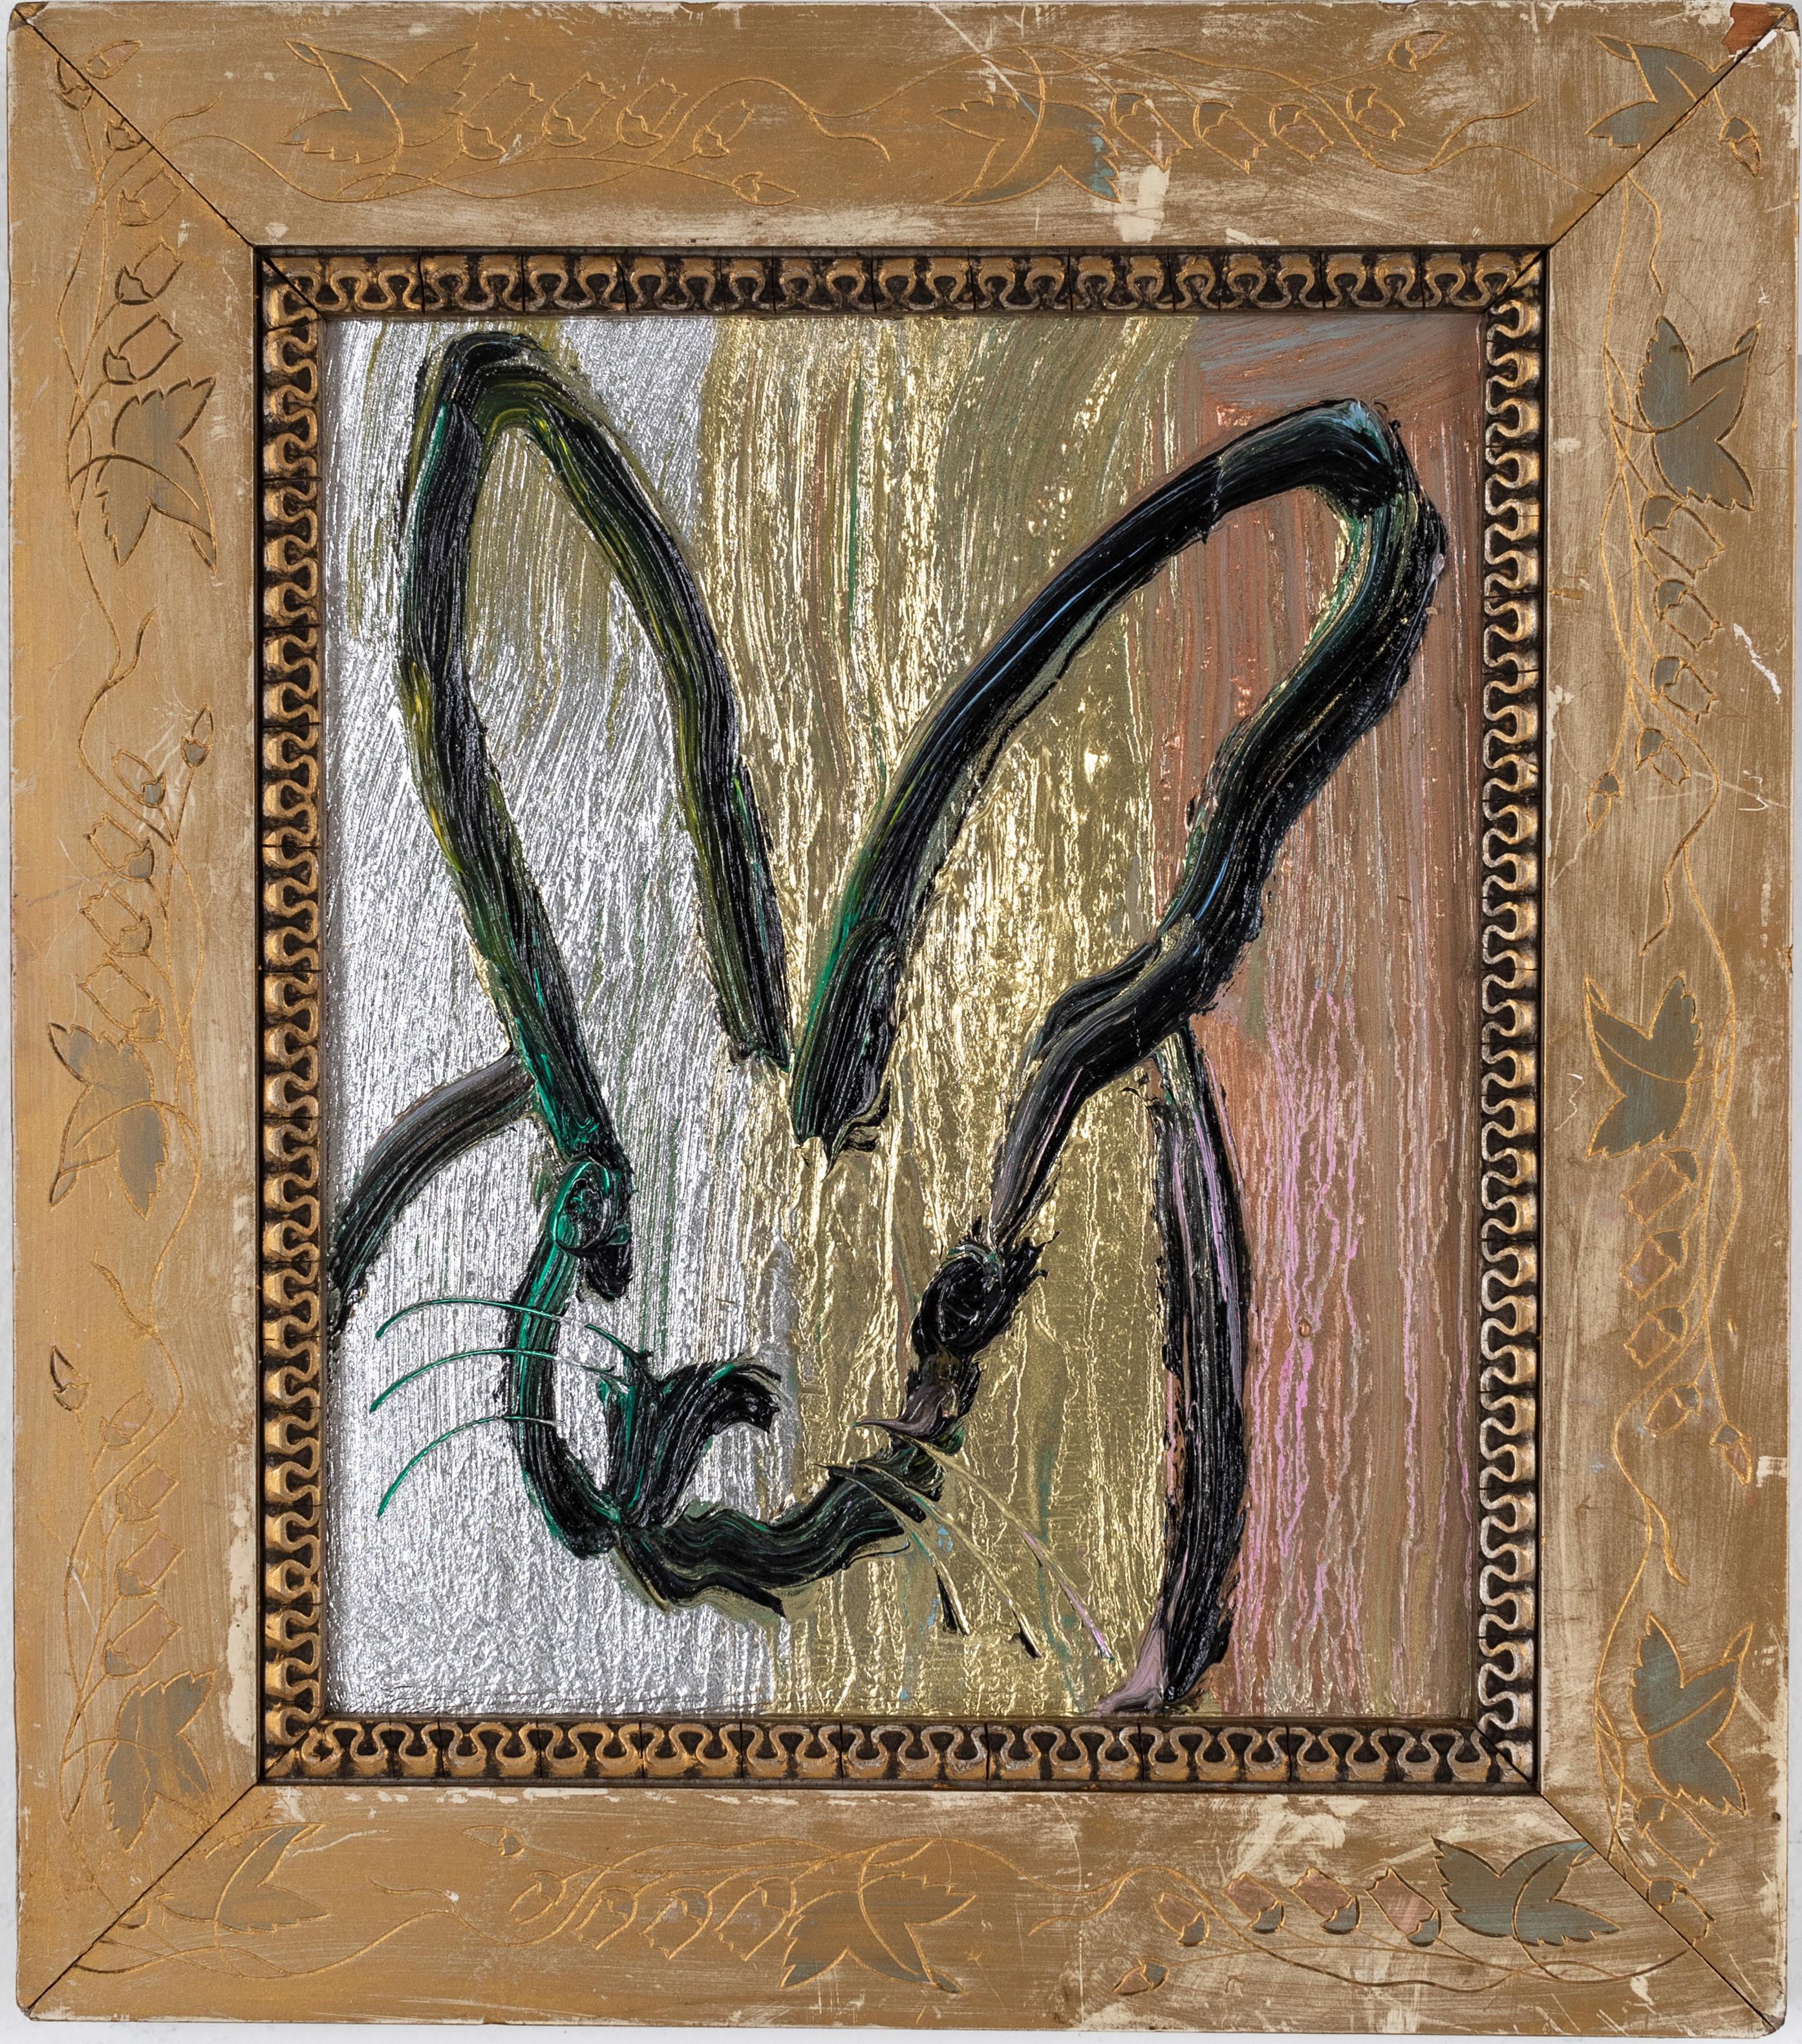 Hunt Slonem "Danny" Metallic Bunny
Black gestured bunny on a multicolored metallic background in an antique frame

Unframed: 12 x 10 inches  
Framed: 17 x 15 inches
*Painting is framed - Please note that not all Hunt Slonem frames are not in mint